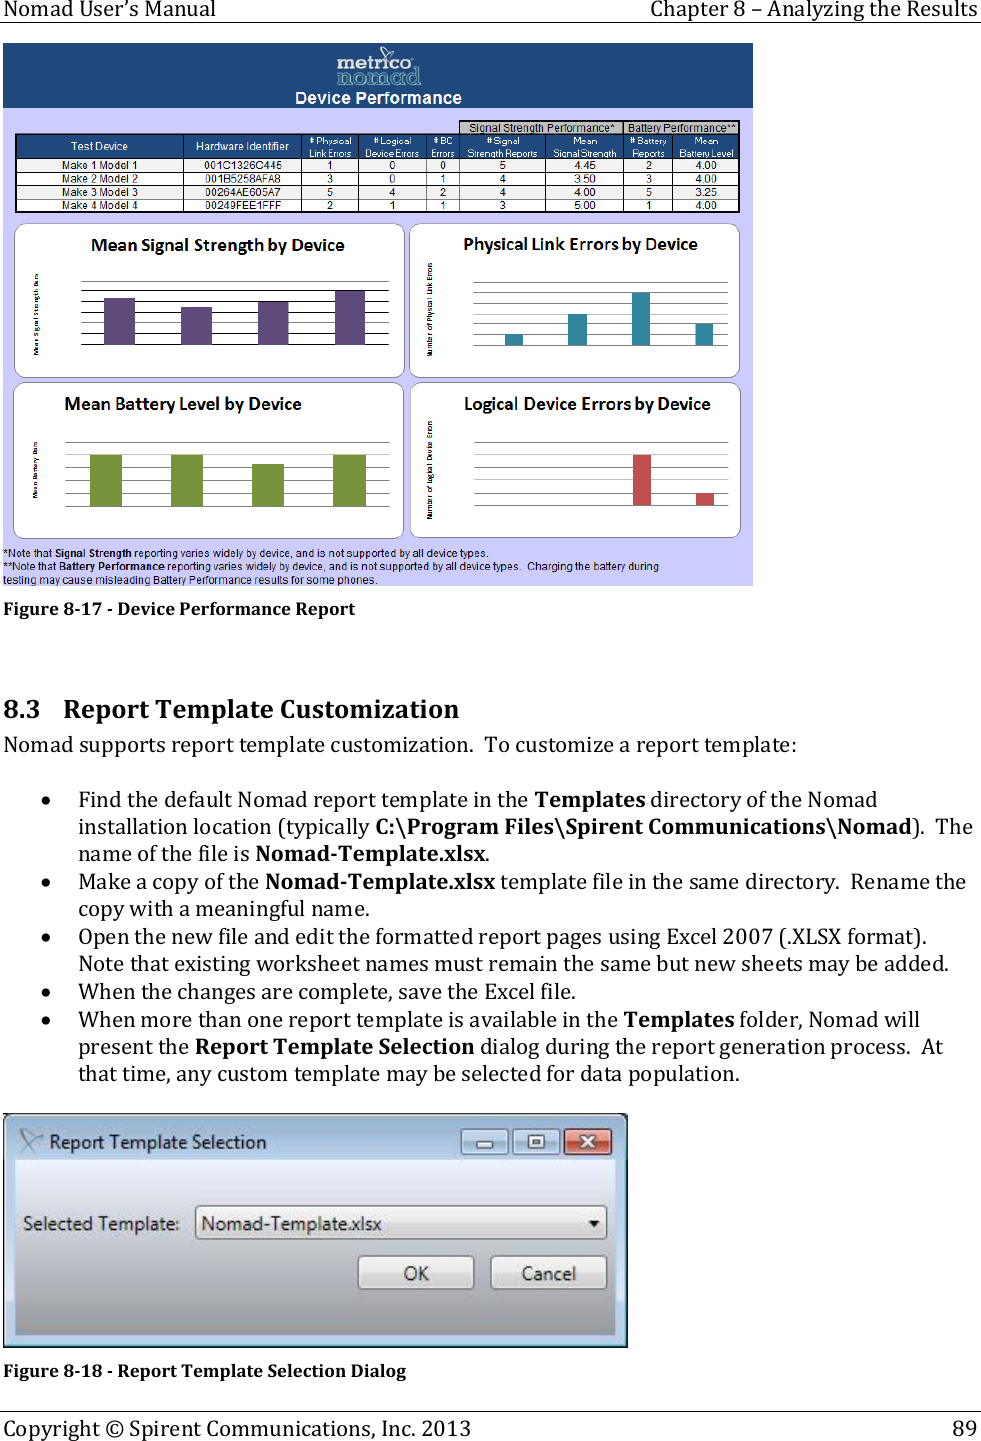  Nomad User’s Manual  Chapter 8 – Analyzing the Results Copyright © Spirent Communications, Inc. 2013    89   Figure 8-17 - Device Performance Report  8.3 Report Template Customization Nomad supports report template customization.  To customize a report template:   Find the default Nomad report template in the Templates directory of the Nomad installation location (typically C:\Program Files\Spirent Communications\Nomad).  The name of the file is Nomad-Template.xlsx.  Make a copy of the Nomad-Template.xlsx template file in the same directory.  Rename the copy with a meaningful name.  Open the new file and edit the formatted report pages using Excel 2007 (.XLSX format).  Note that existing worksheet names must remain the same but new sheets may be added.  When the changes are complete, save the Excel file.  When more than one report template is available in the Templates folder, Nomad will present the Report Template Selection dialog during the report generation process.  At that time, any custom template may be selected for data population.   Figure 8-18 - Report Template Selection Dialog 